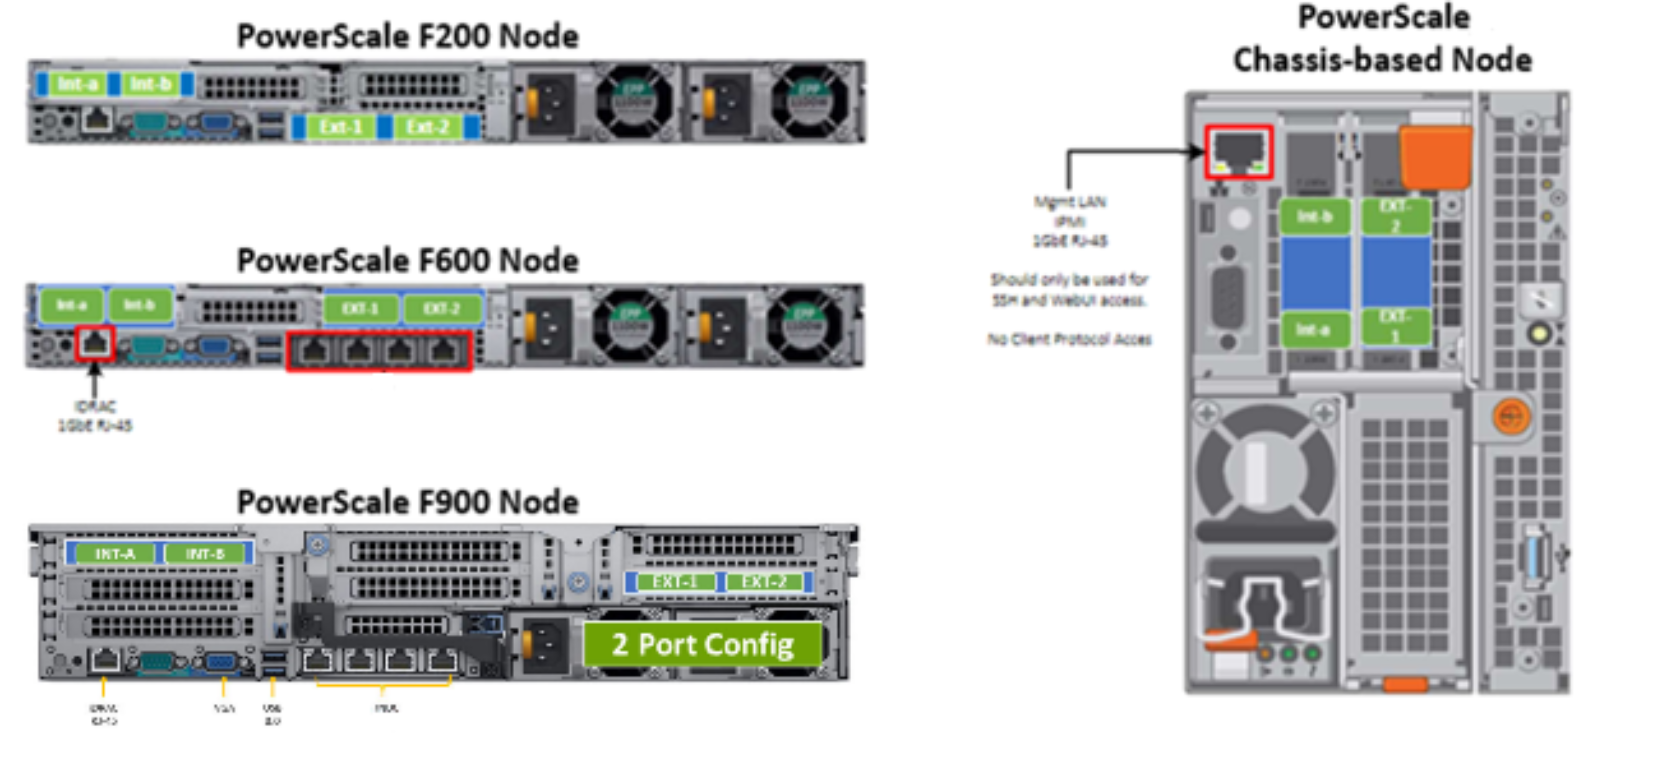 Graphic showing PowerScale node rear views with network interface locations.